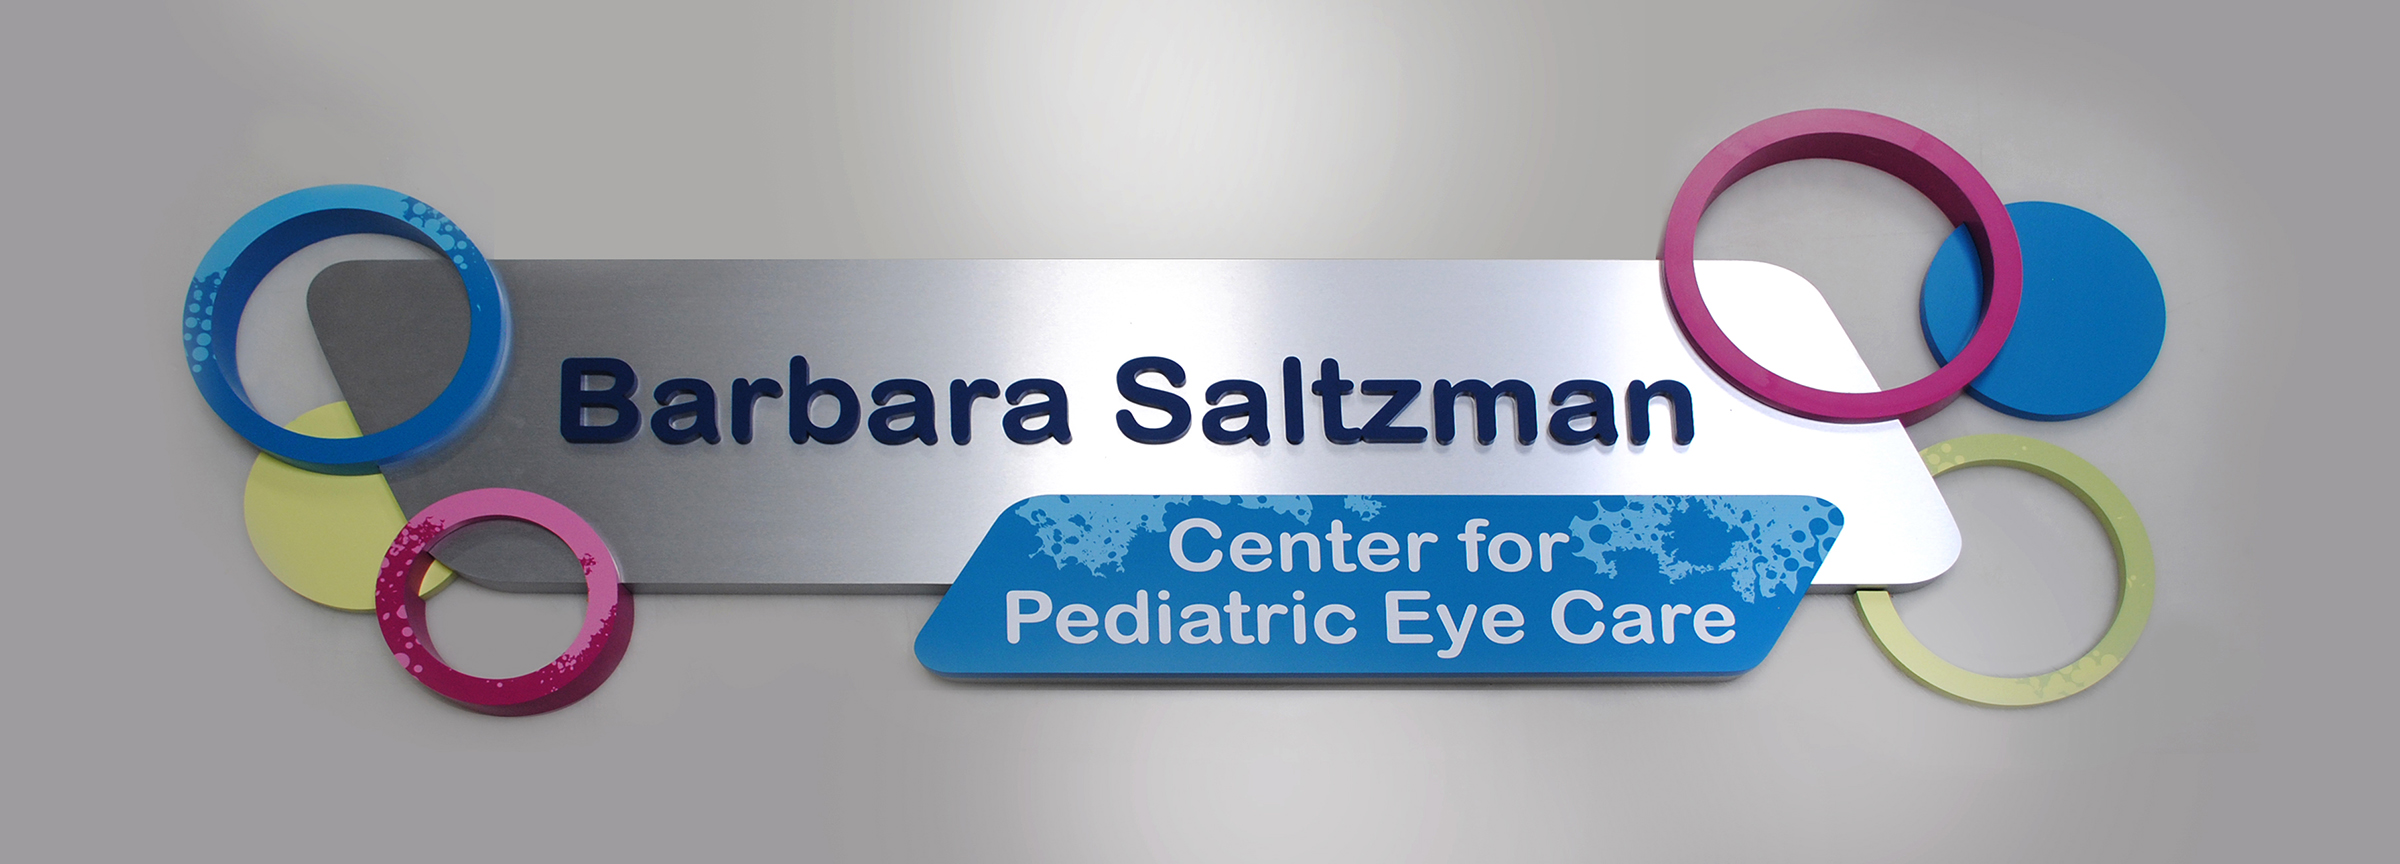 Named Room, Donor Recognition Plaque, Permanent Plaque, Way Finding, Major Donor Plaque, Pediatric Signage